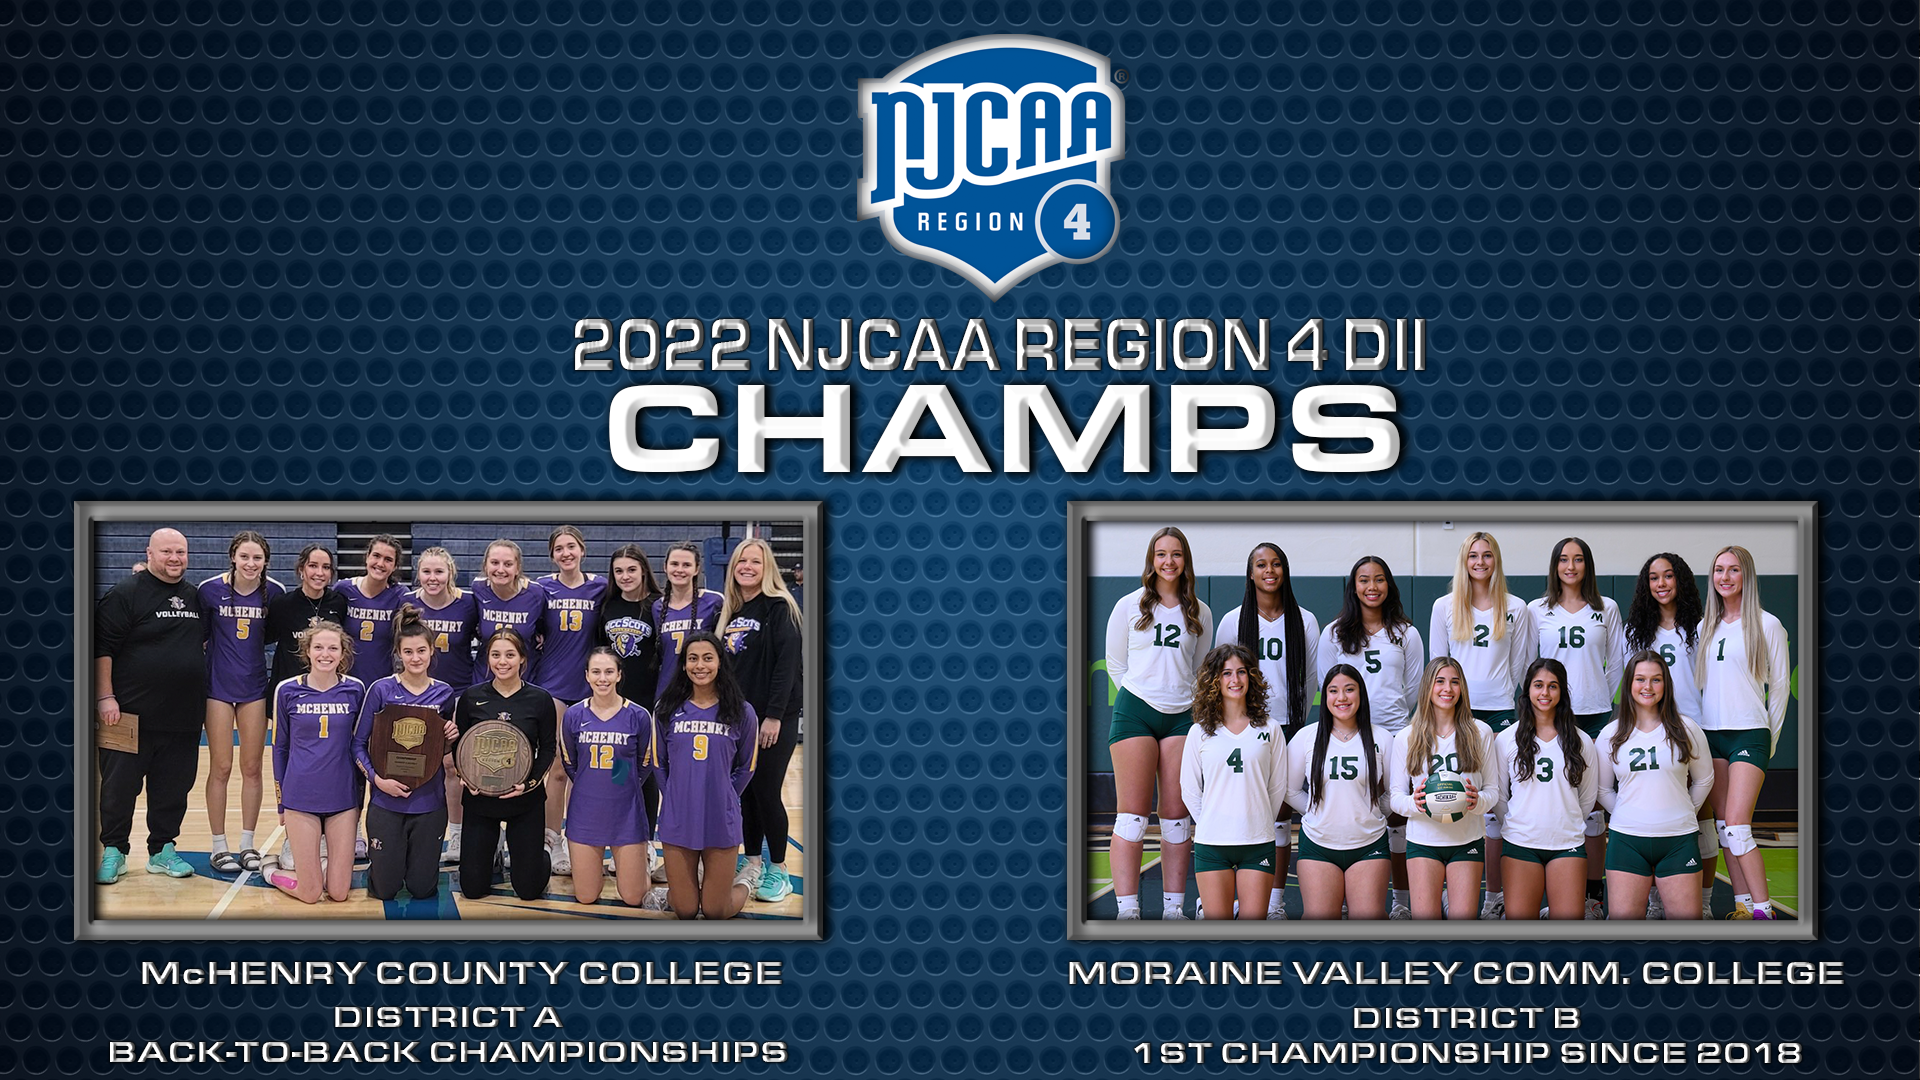 (Images courtesy of McHenry County College Athletics & Moraine Valley Community College Athletics)